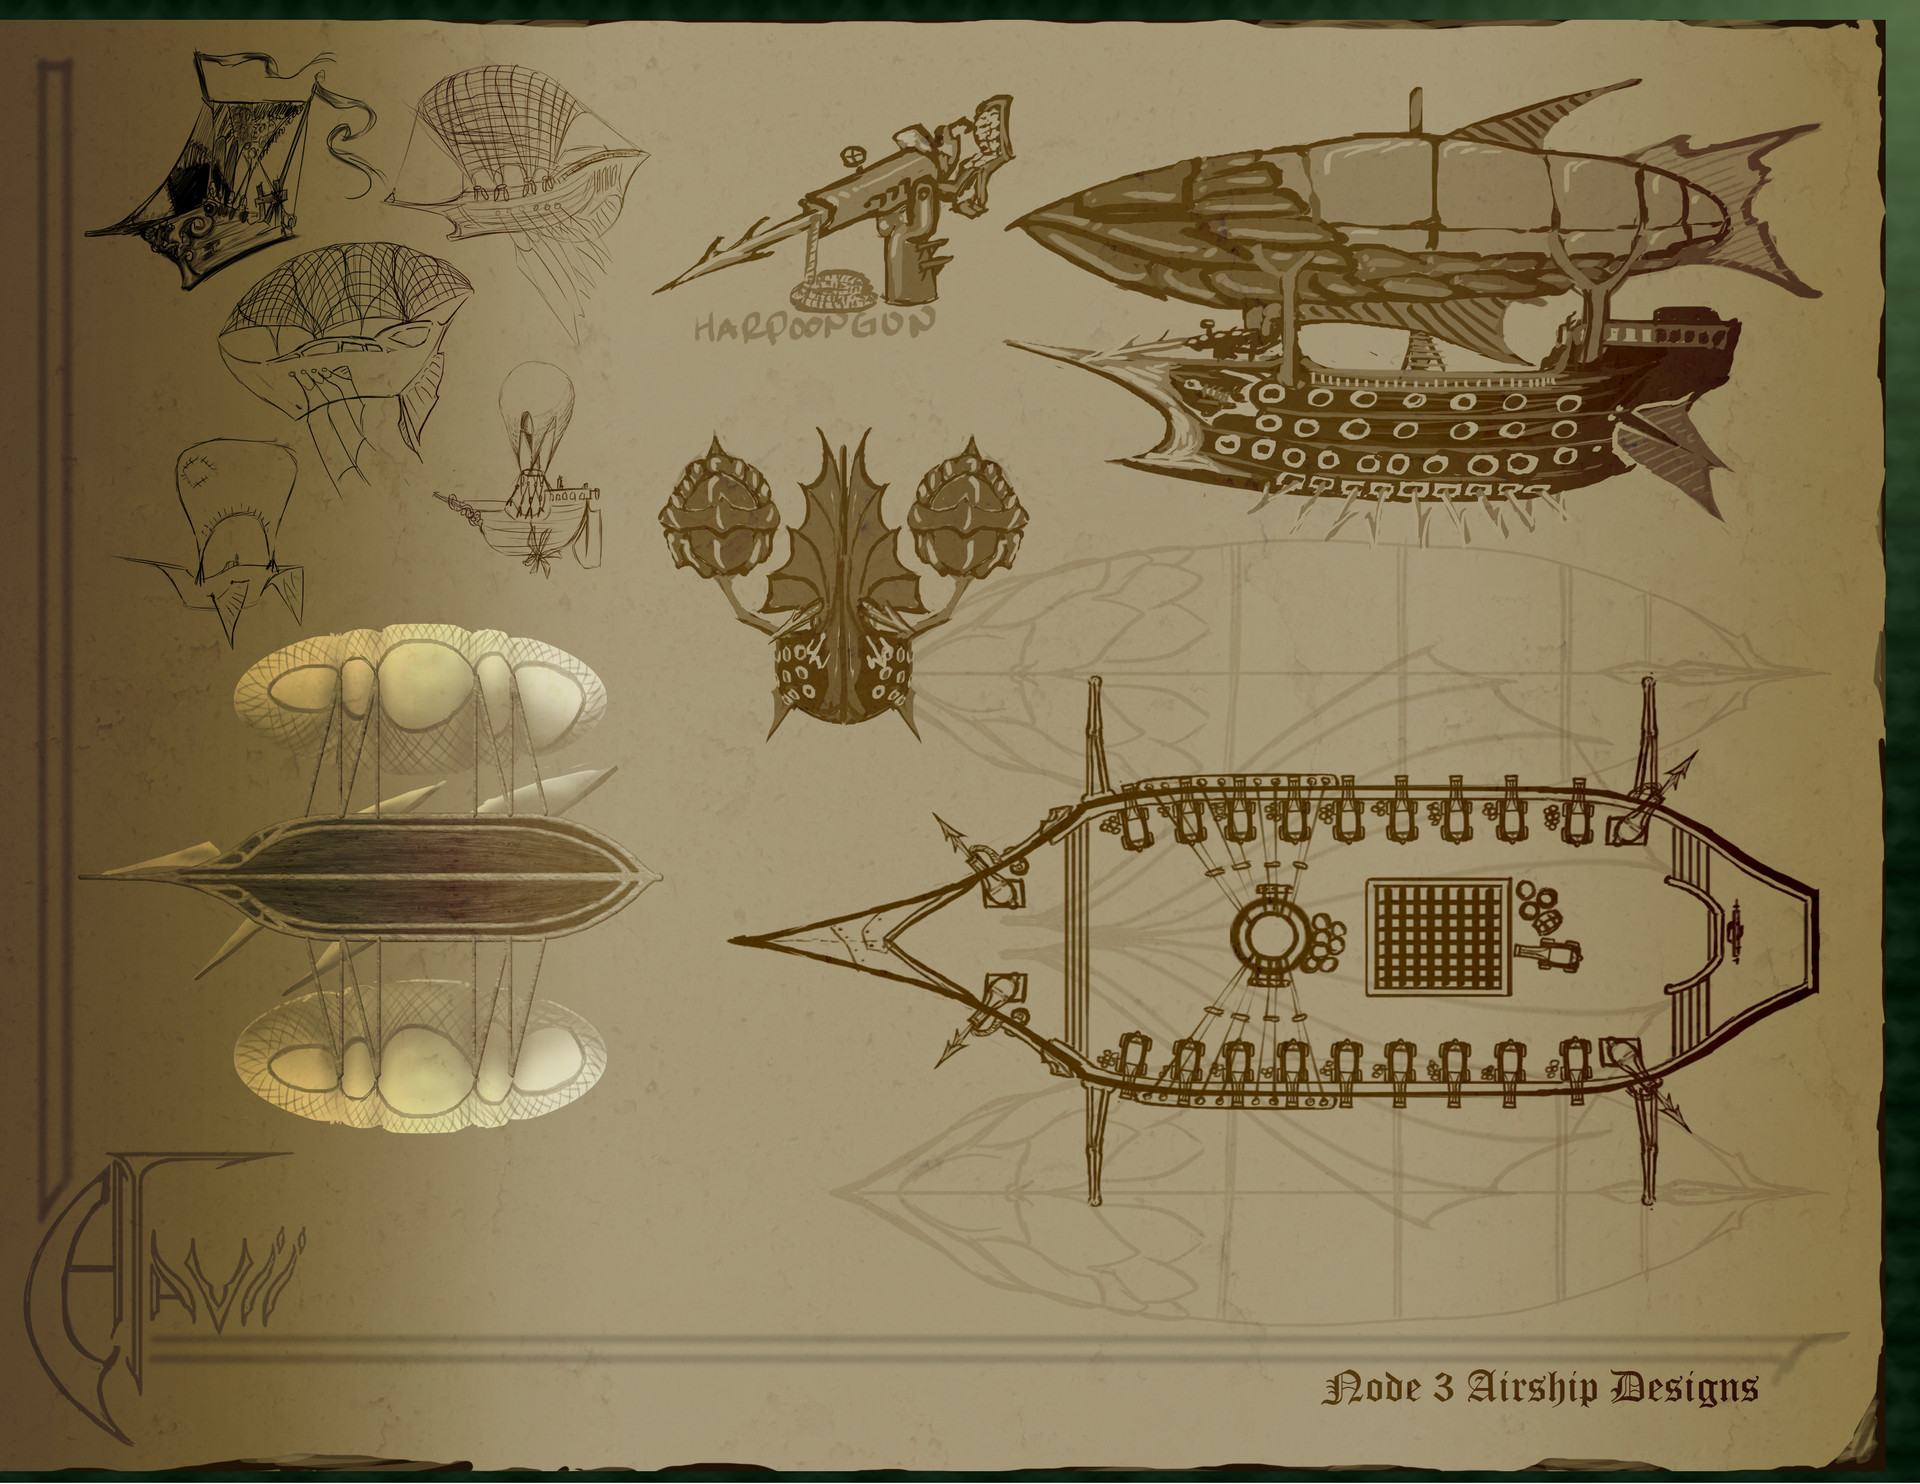 Two minds think better than one Kimberley-hickey-node-3-airship-designs